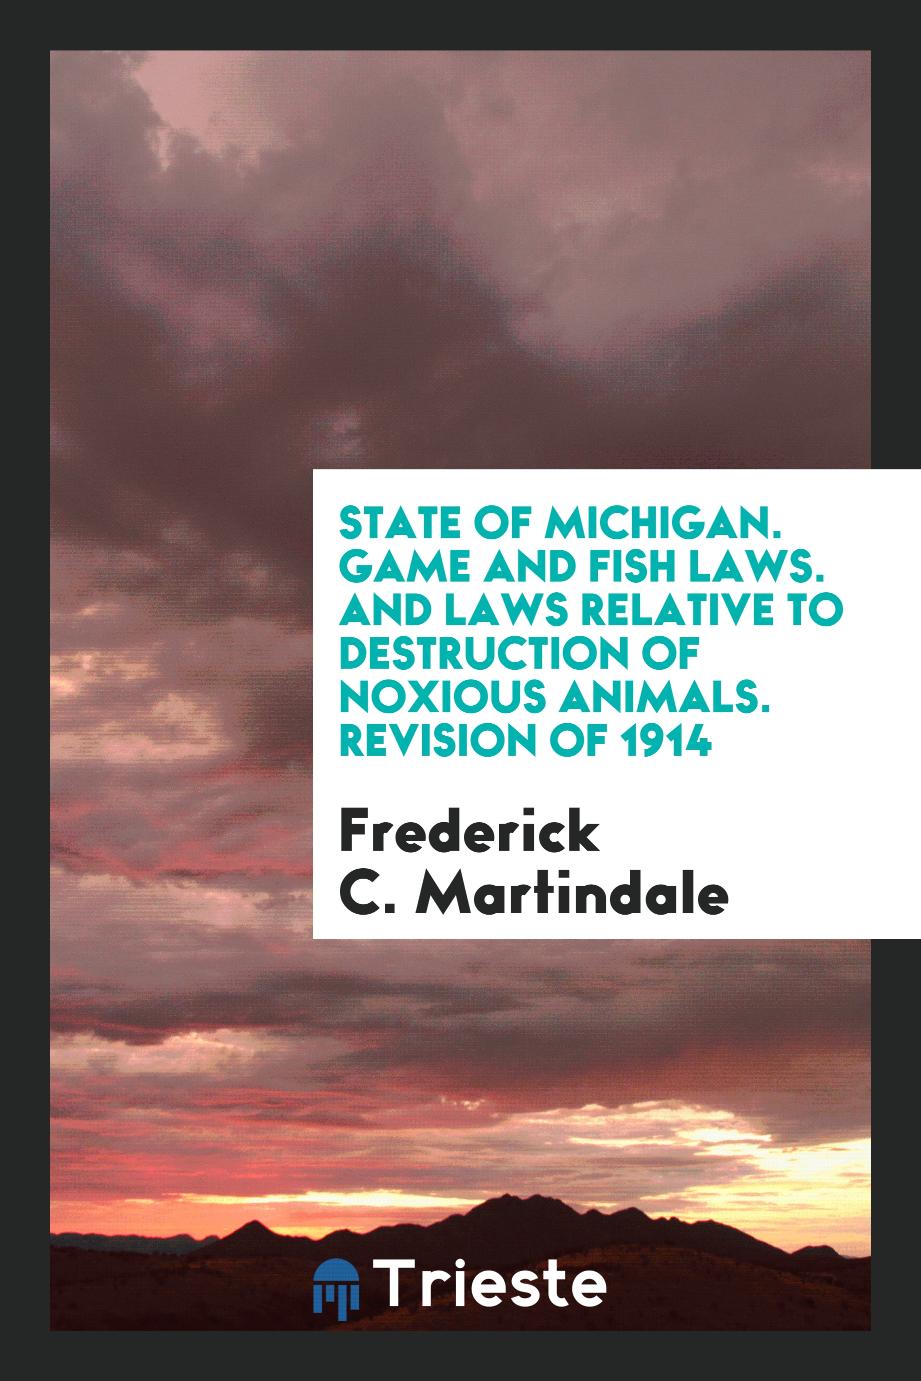 Frederick C. Martindale - State of Michigan. Game and Fish Laws. And Laws Relative to Destruction of Noxious Animals. Revision of 1914